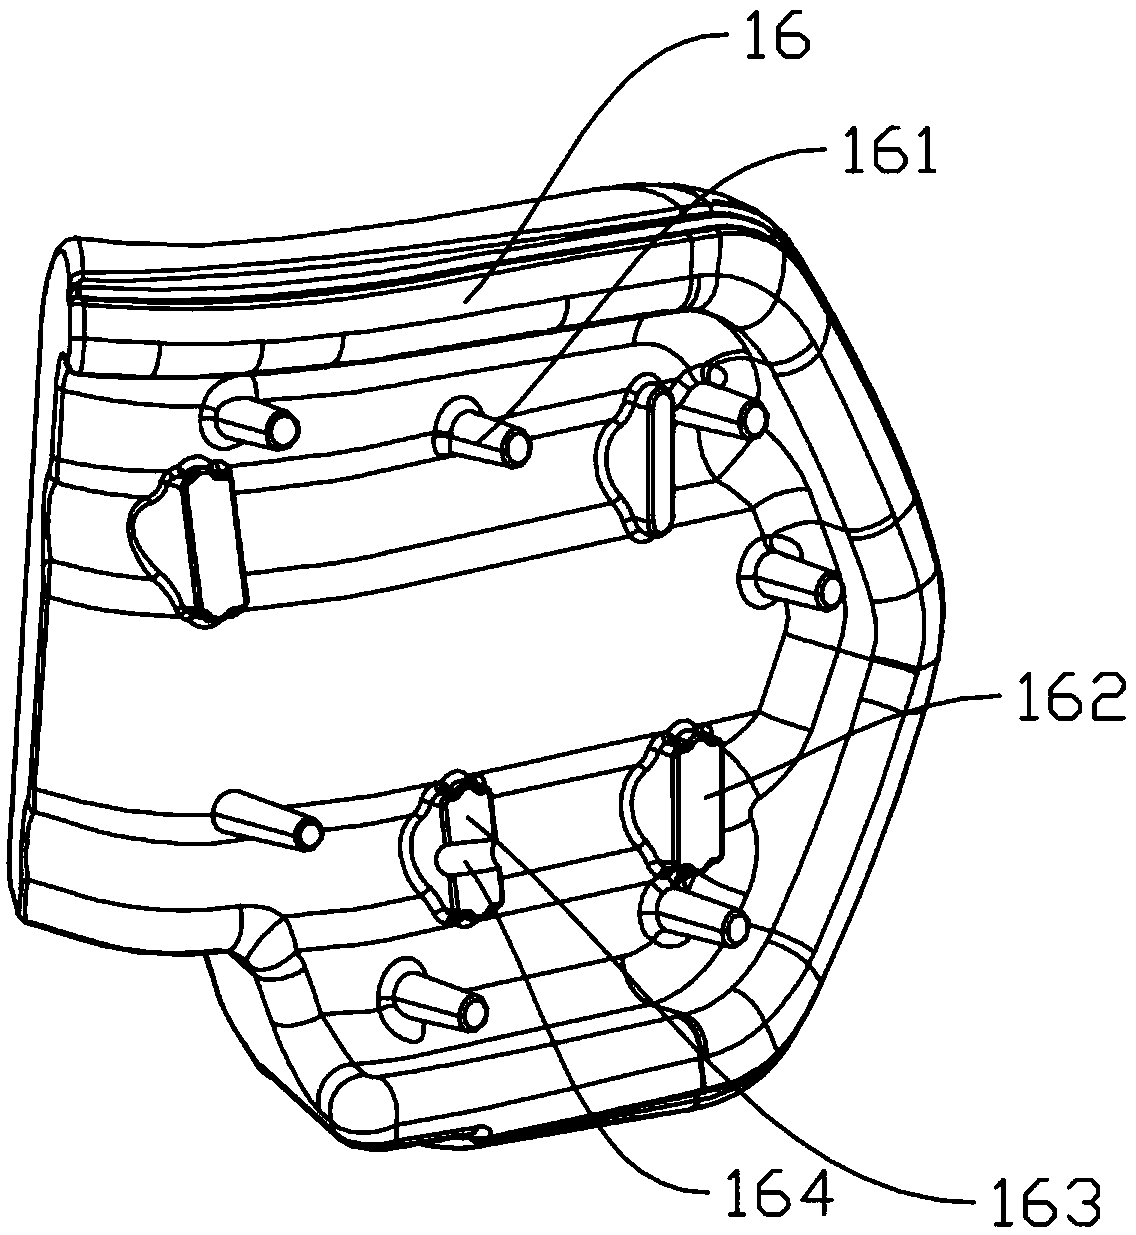 Head-neck flank damping structure, safety headrest and child safety seat